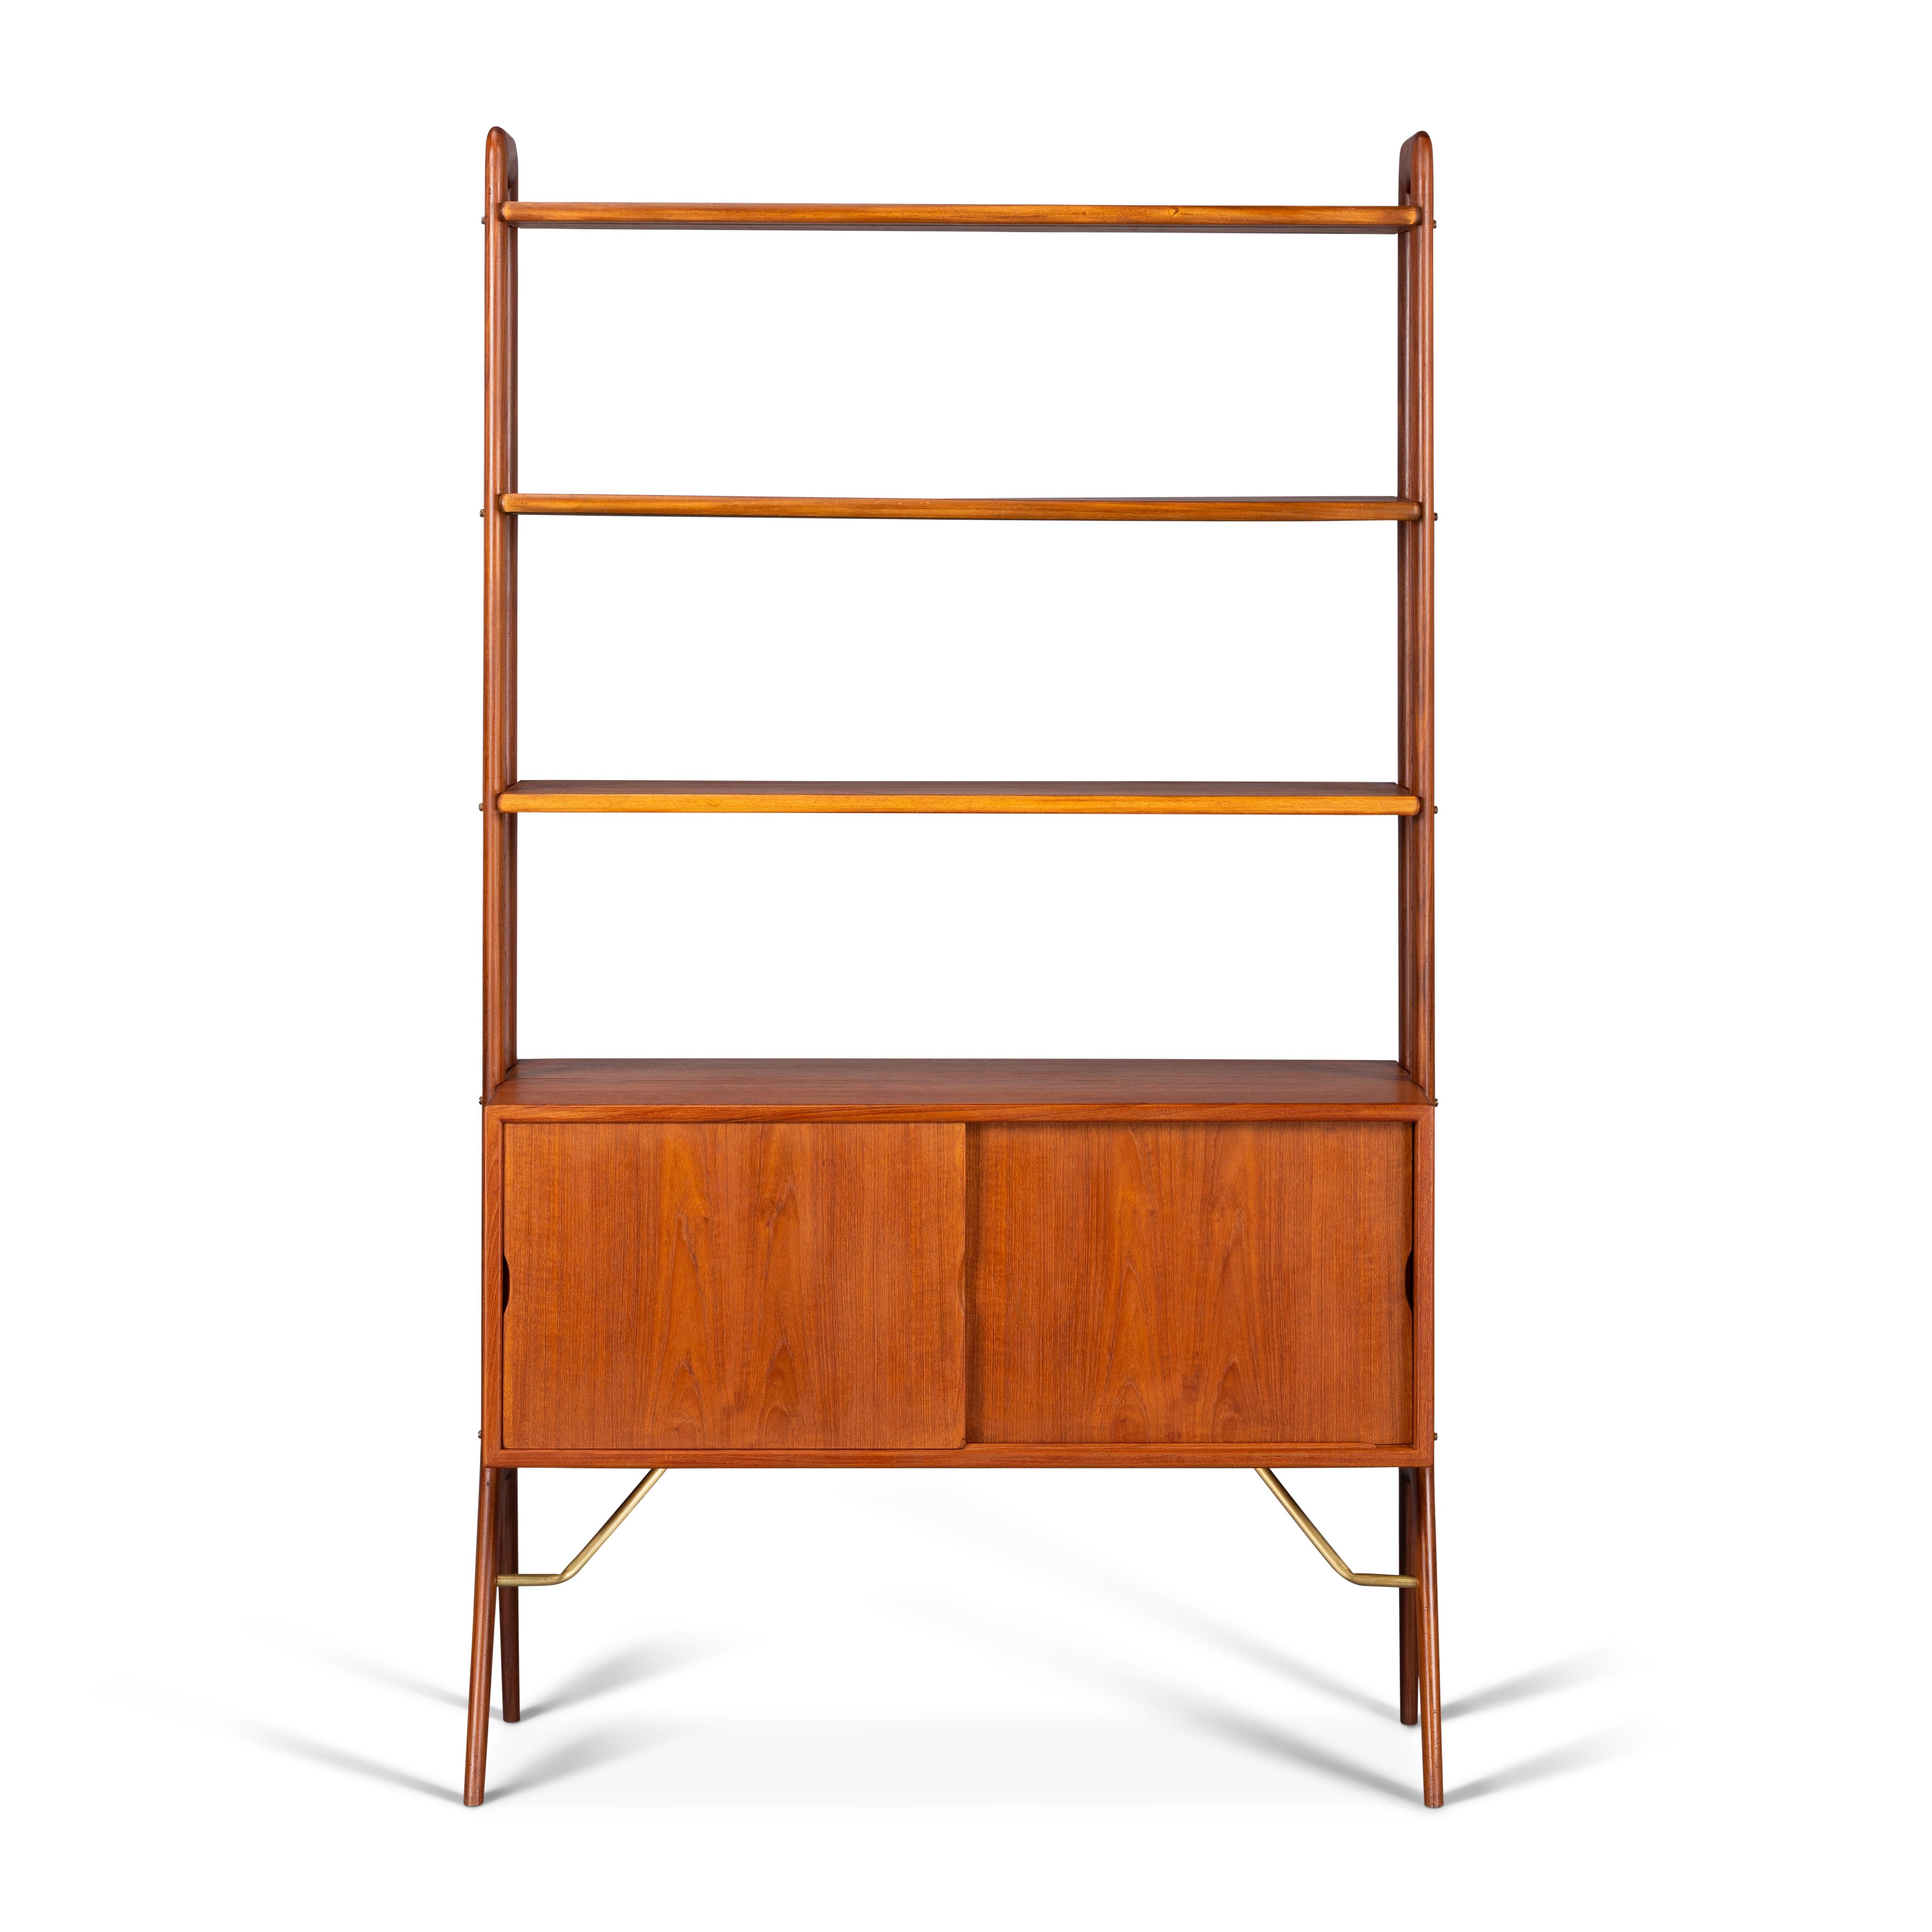 This Danish Mid-Century Modern freestanding room divider/bookshelf is a top -quality unit. Design by Kurt Ostervig. This chest features three height adjustable shelves, two sliding door larger lower cabinet supported by brass rods. This wonderfully